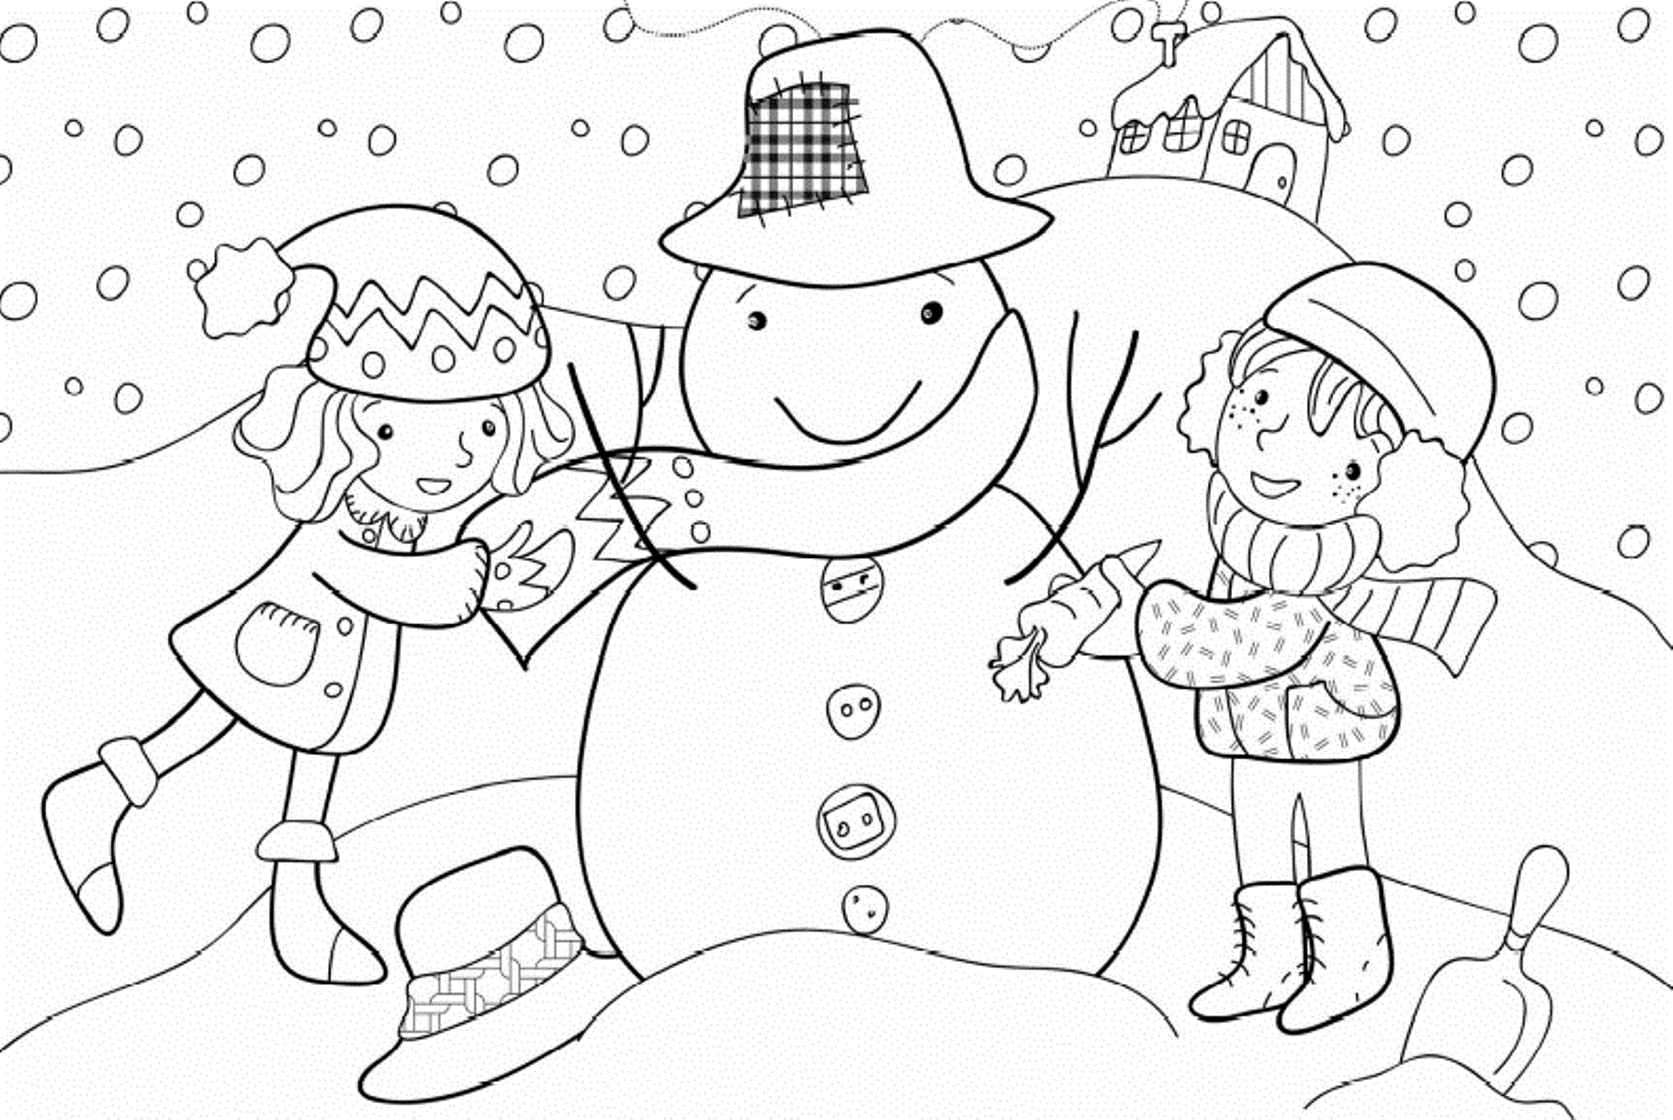 colouring sheets winter winter season coloring pages crafts and worksheets for colouring sheets winter 